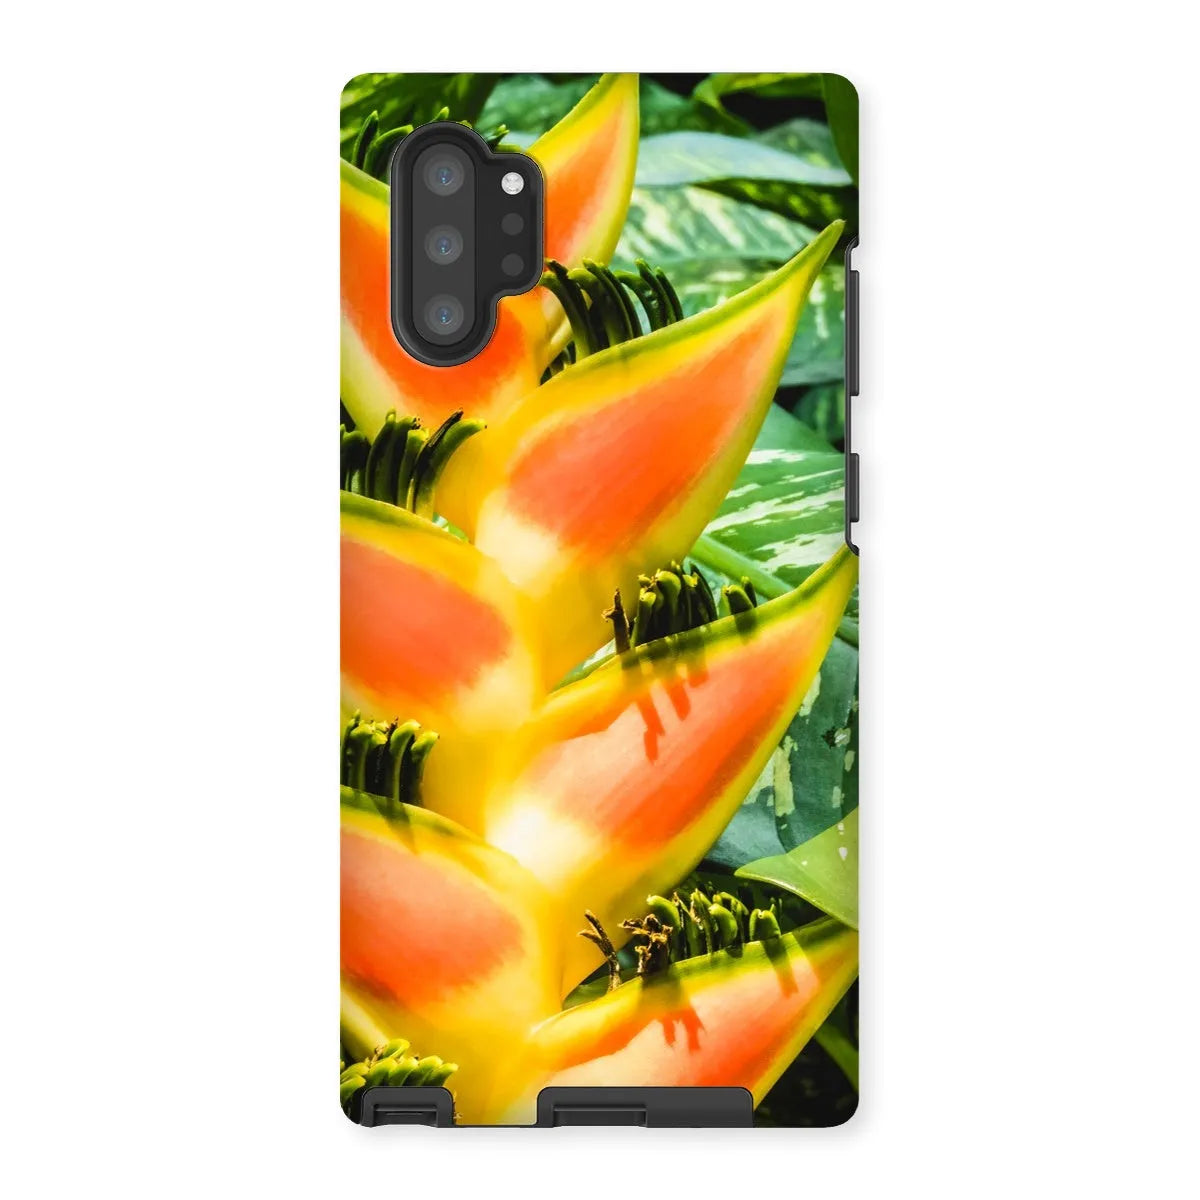 Showstopper Tough Phone Case - Samsung Galaxy Note 10p / Matte - Mobile Phone Cases - Aesthetic Art